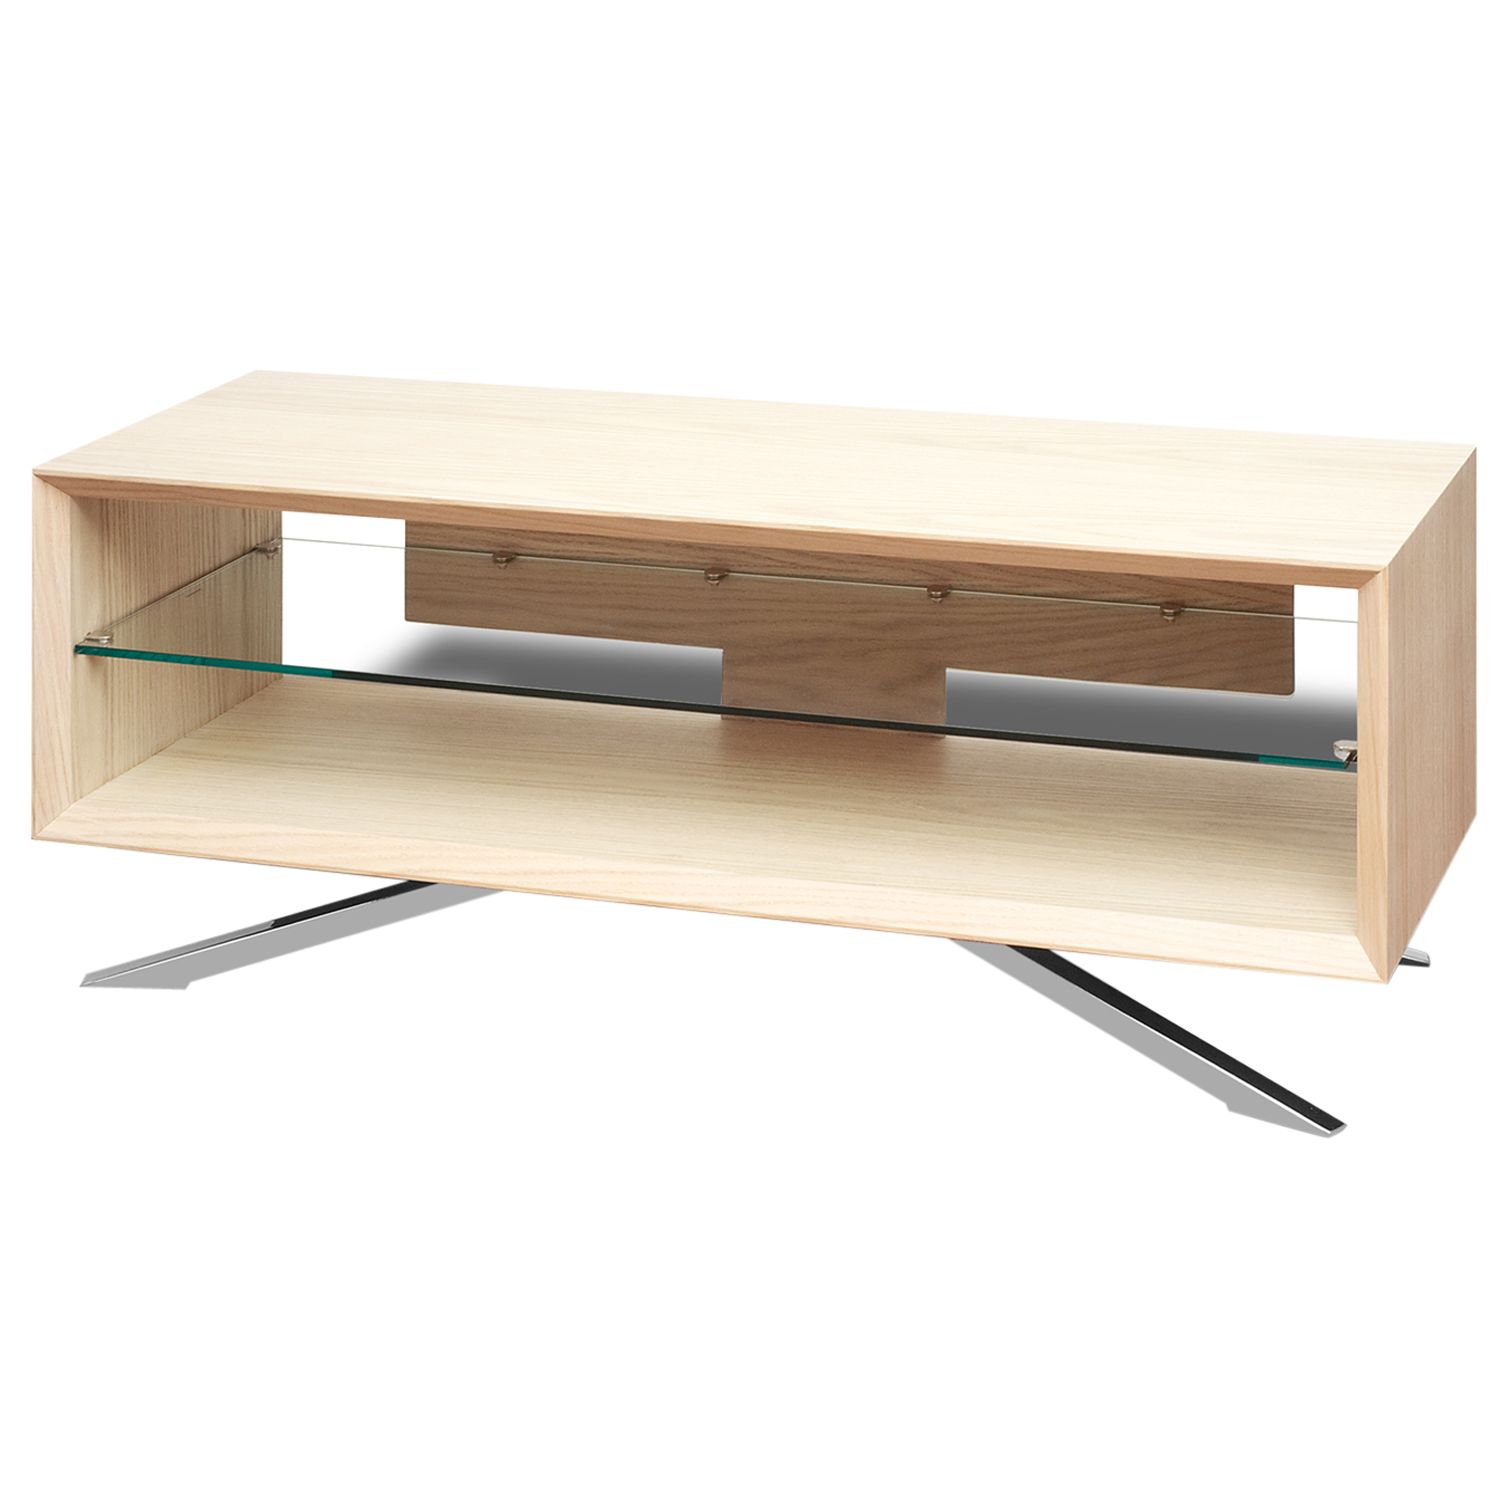 Arena AA110LW TV stand for up to